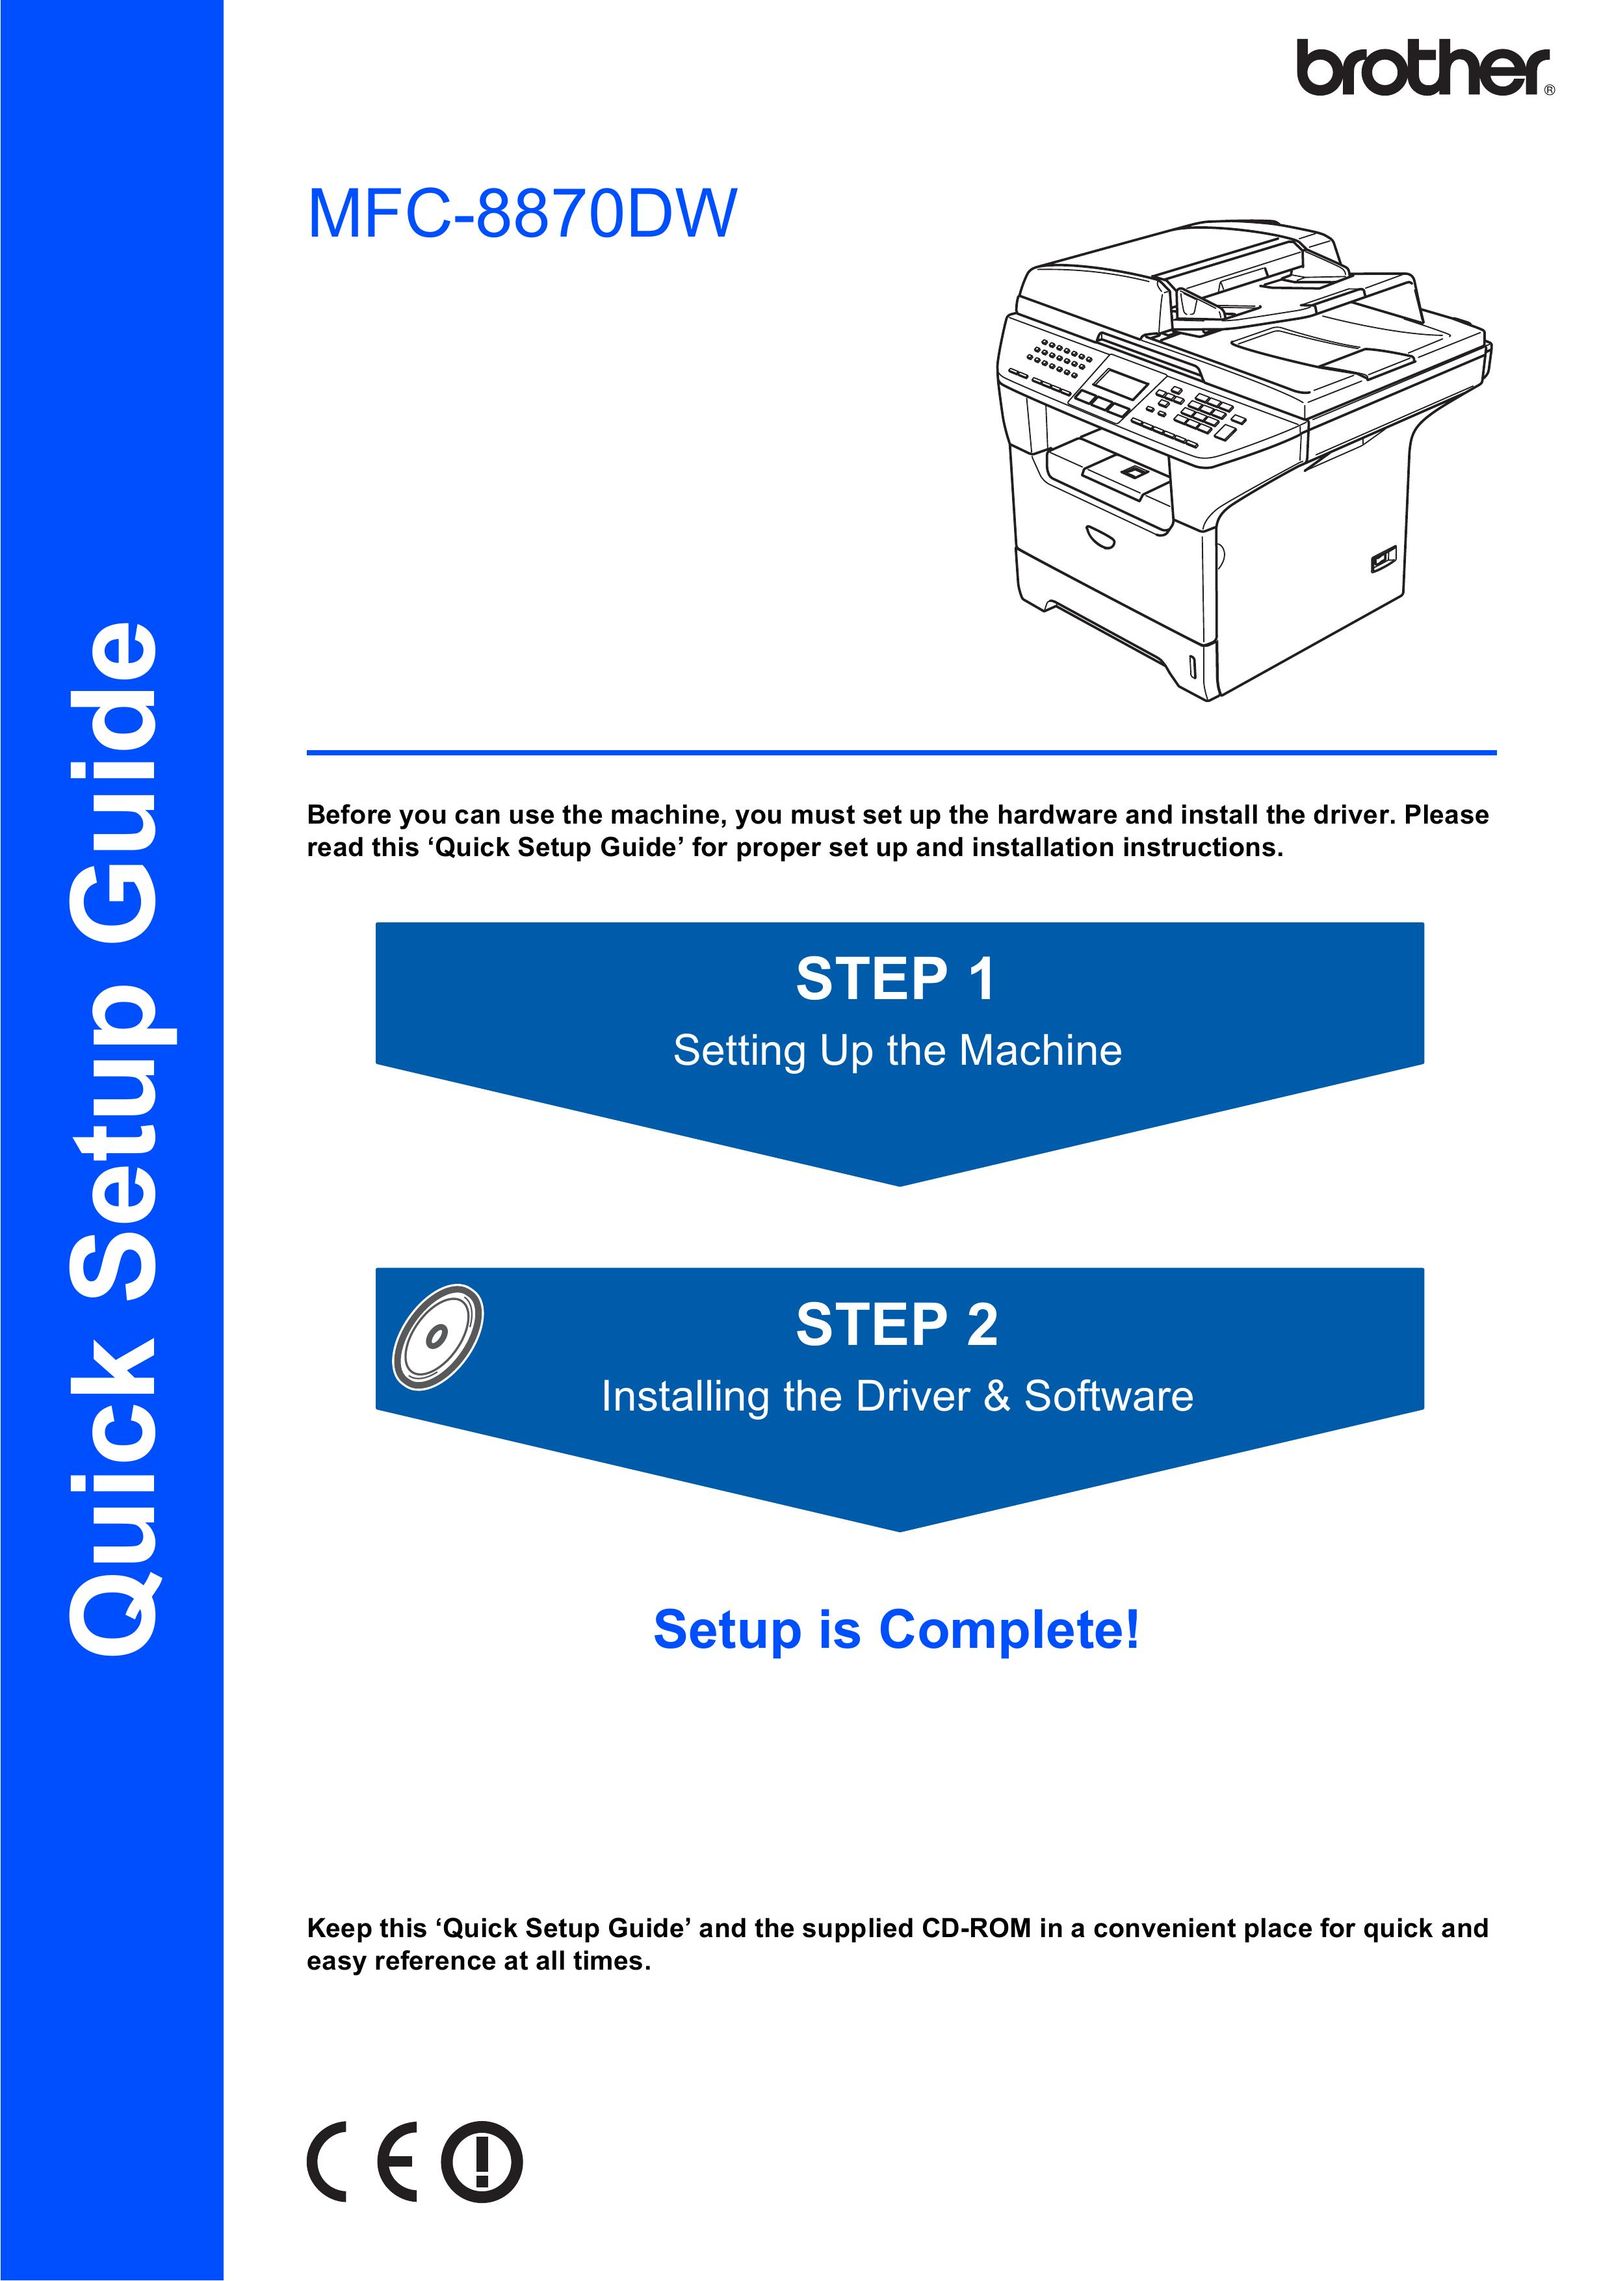 Brother MFC-8870DW Copier User Manual